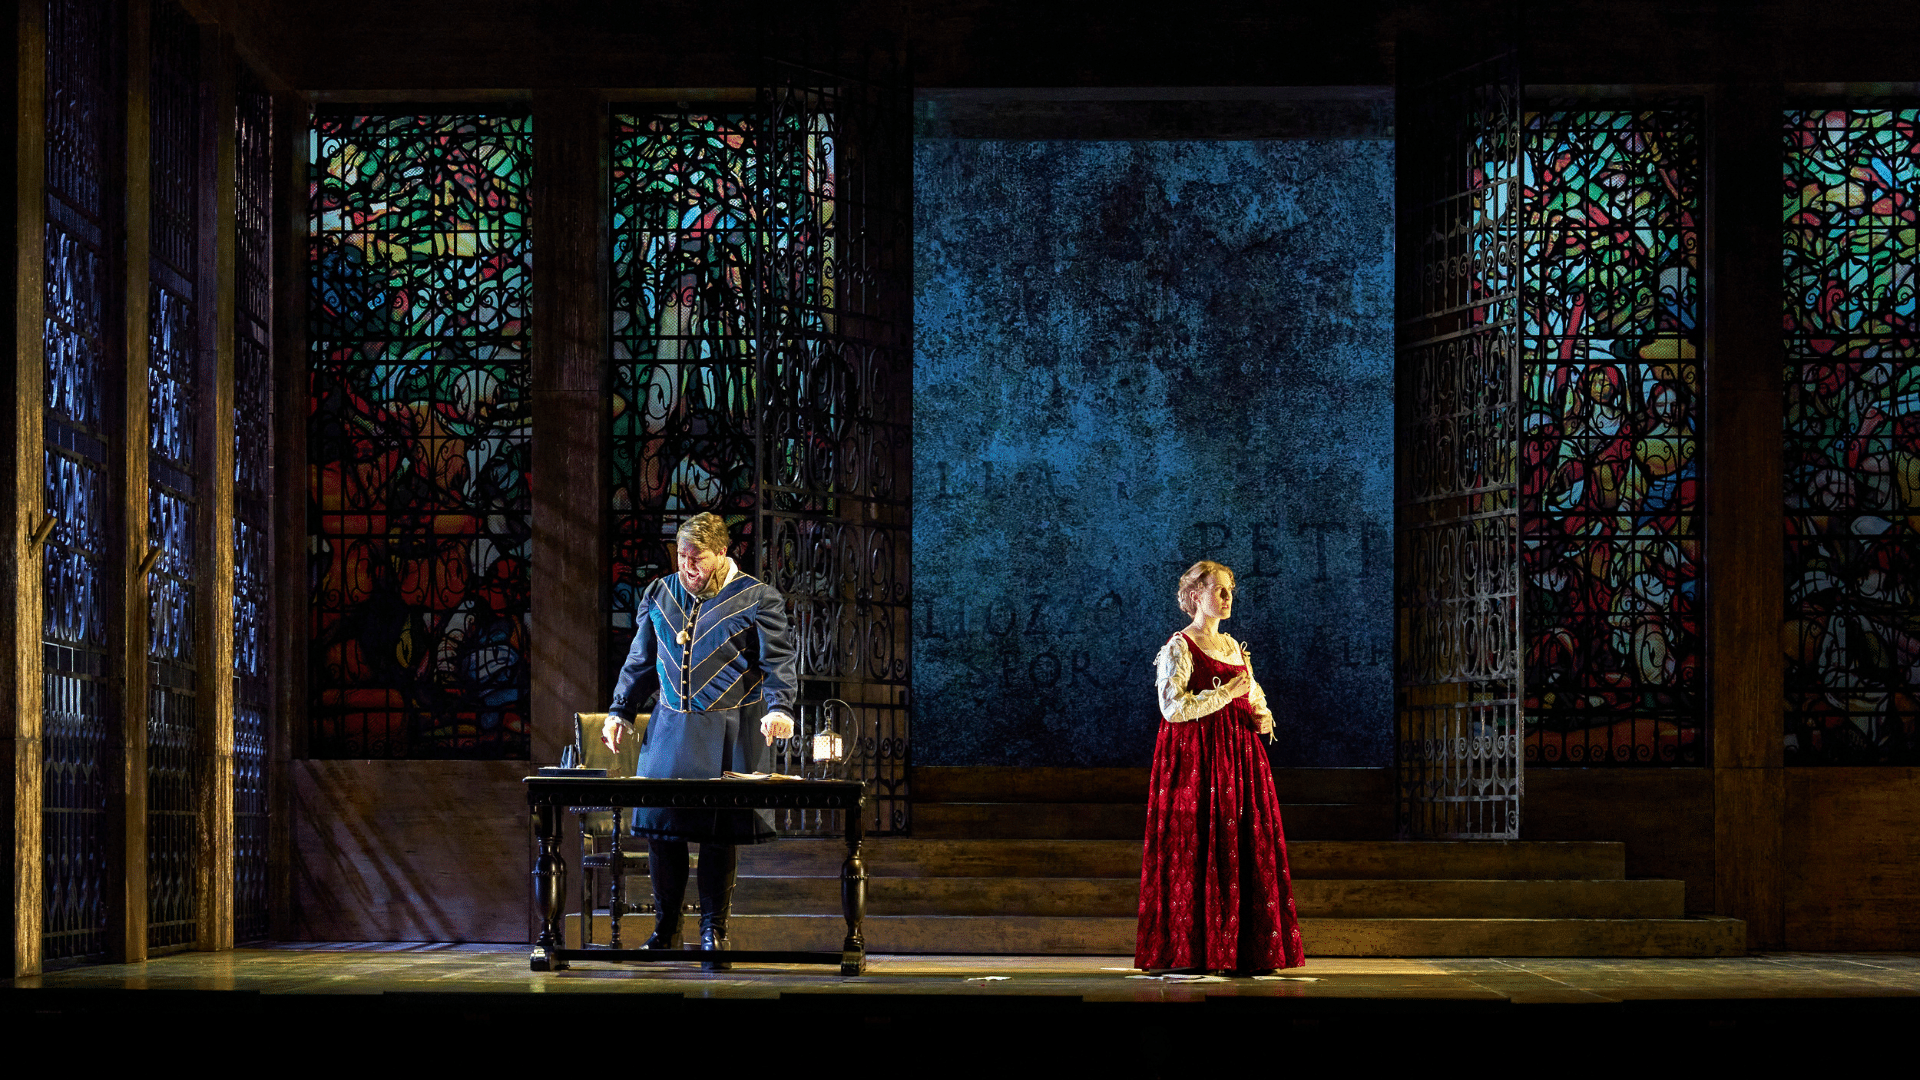 ETO: Lucrezia Borgia production shot - On the left, a man wearing blue and black striped tunics stands behind a desk, while yelling as he faces downwards. On the right, a woman in a red floor-length dress with a white long-sleeved under-blouse faces away from the man towards the right. Behind them on both sides are large, colourful stained glass windows and in the middle, steps leading to an opening flanked with black metal gates. Through the opening is a blue textured wall with some roman lettering.